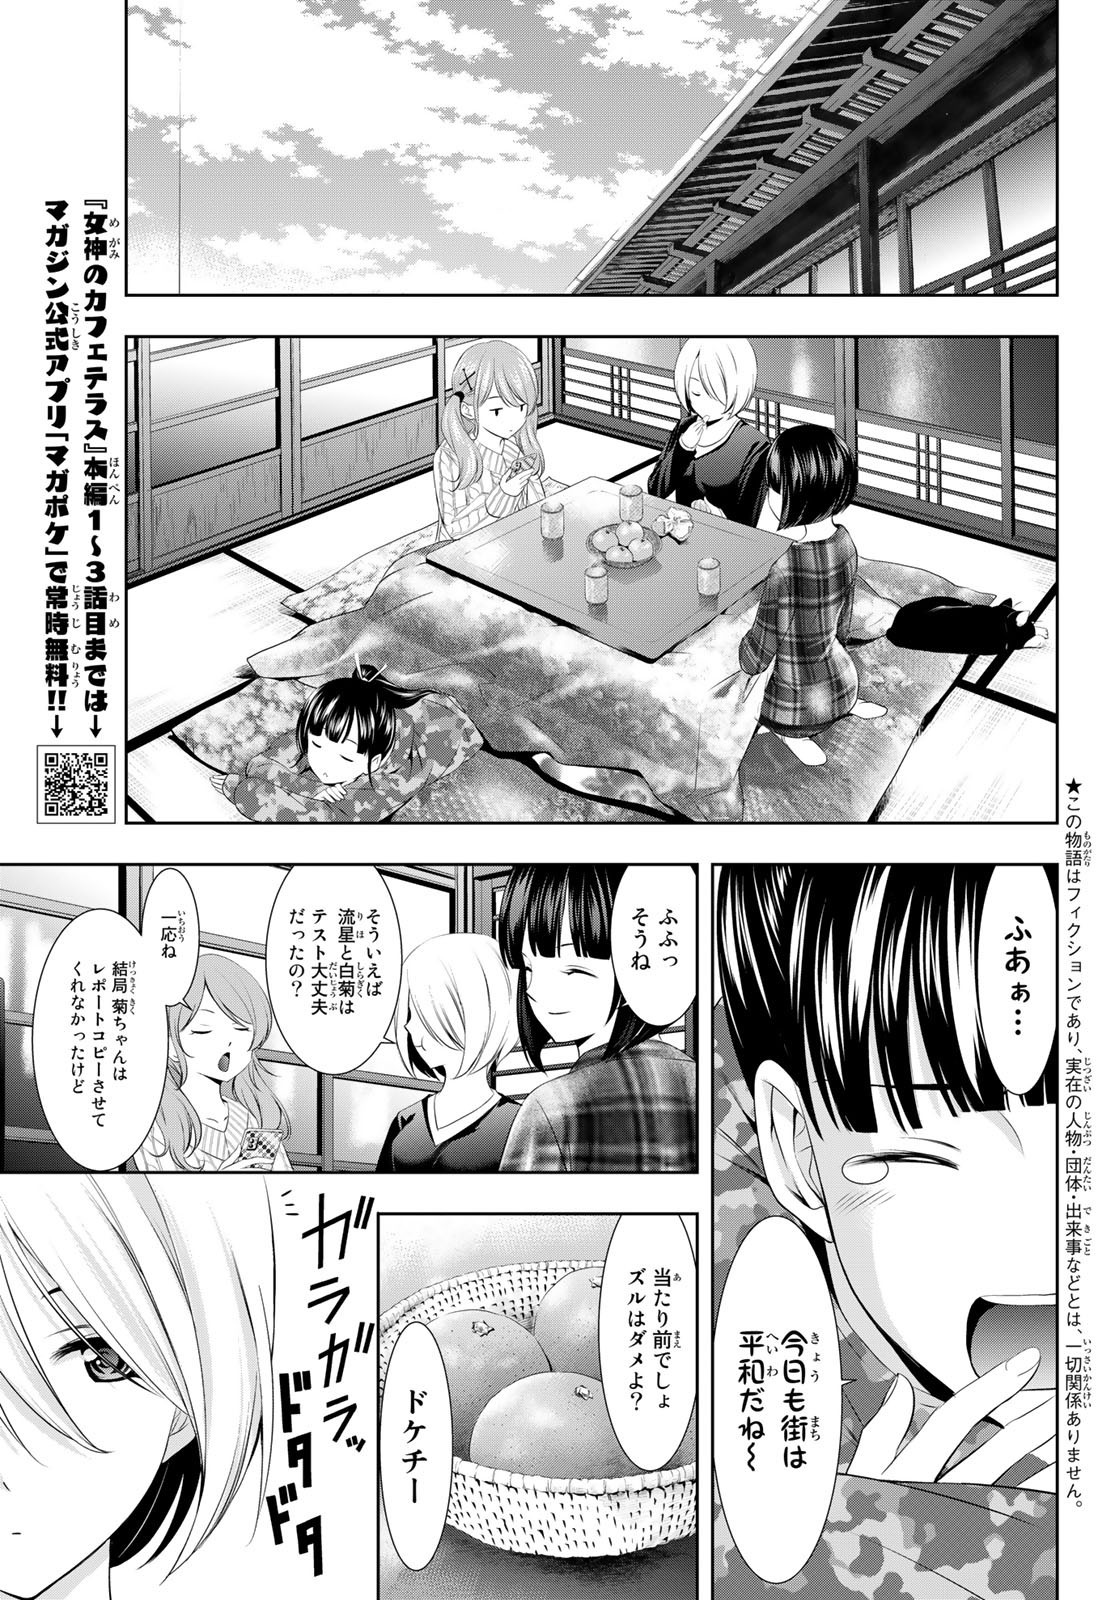 Goddess-Cafe-Terrace - Chapter 095 - Page 3